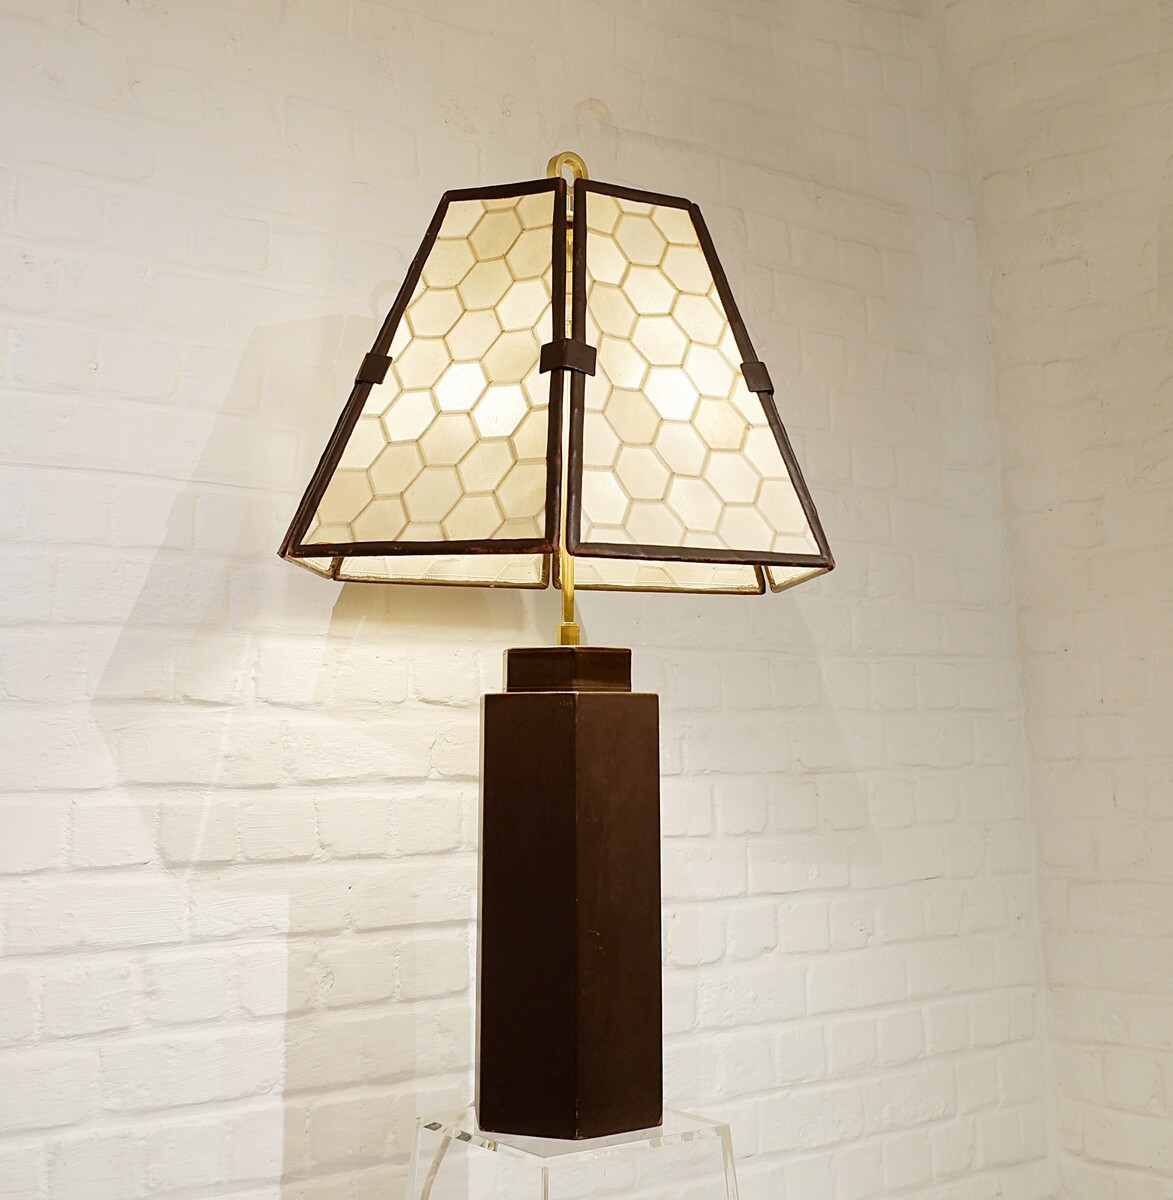 Brown Leather lamp and parchment lampshade, circa 1970